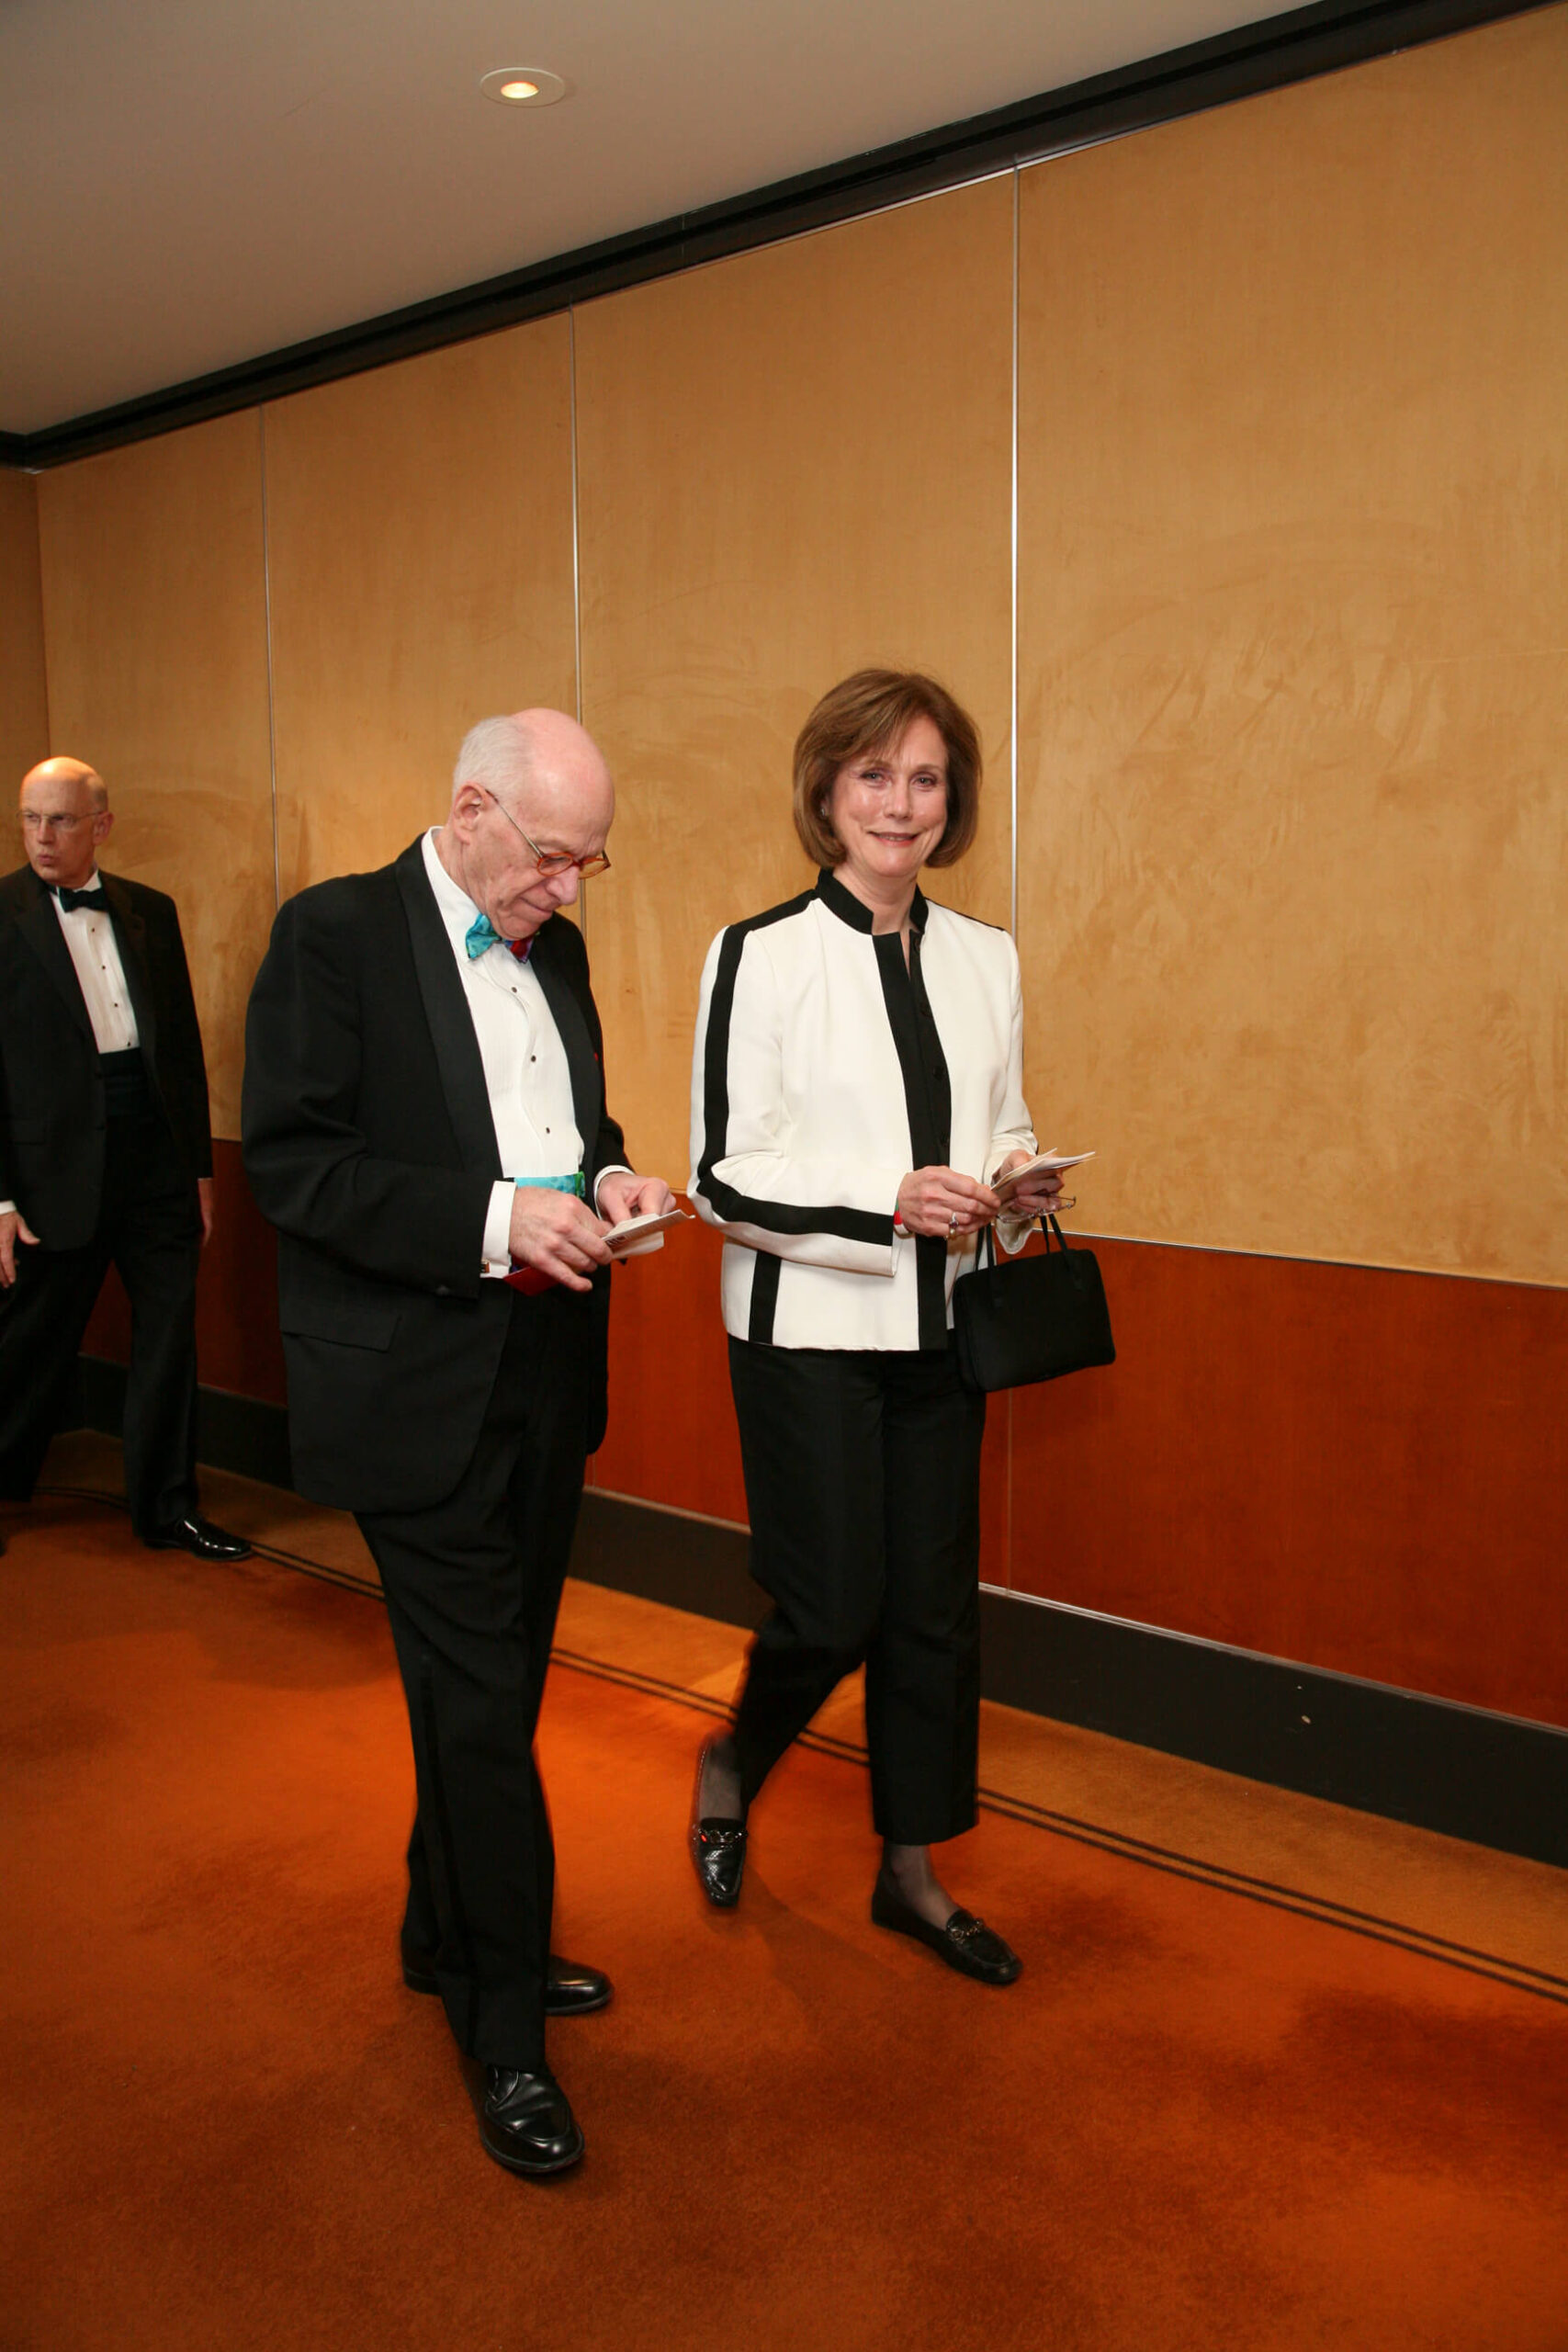 Mr. Theodore Horváth and Ms. Anne C. Bader